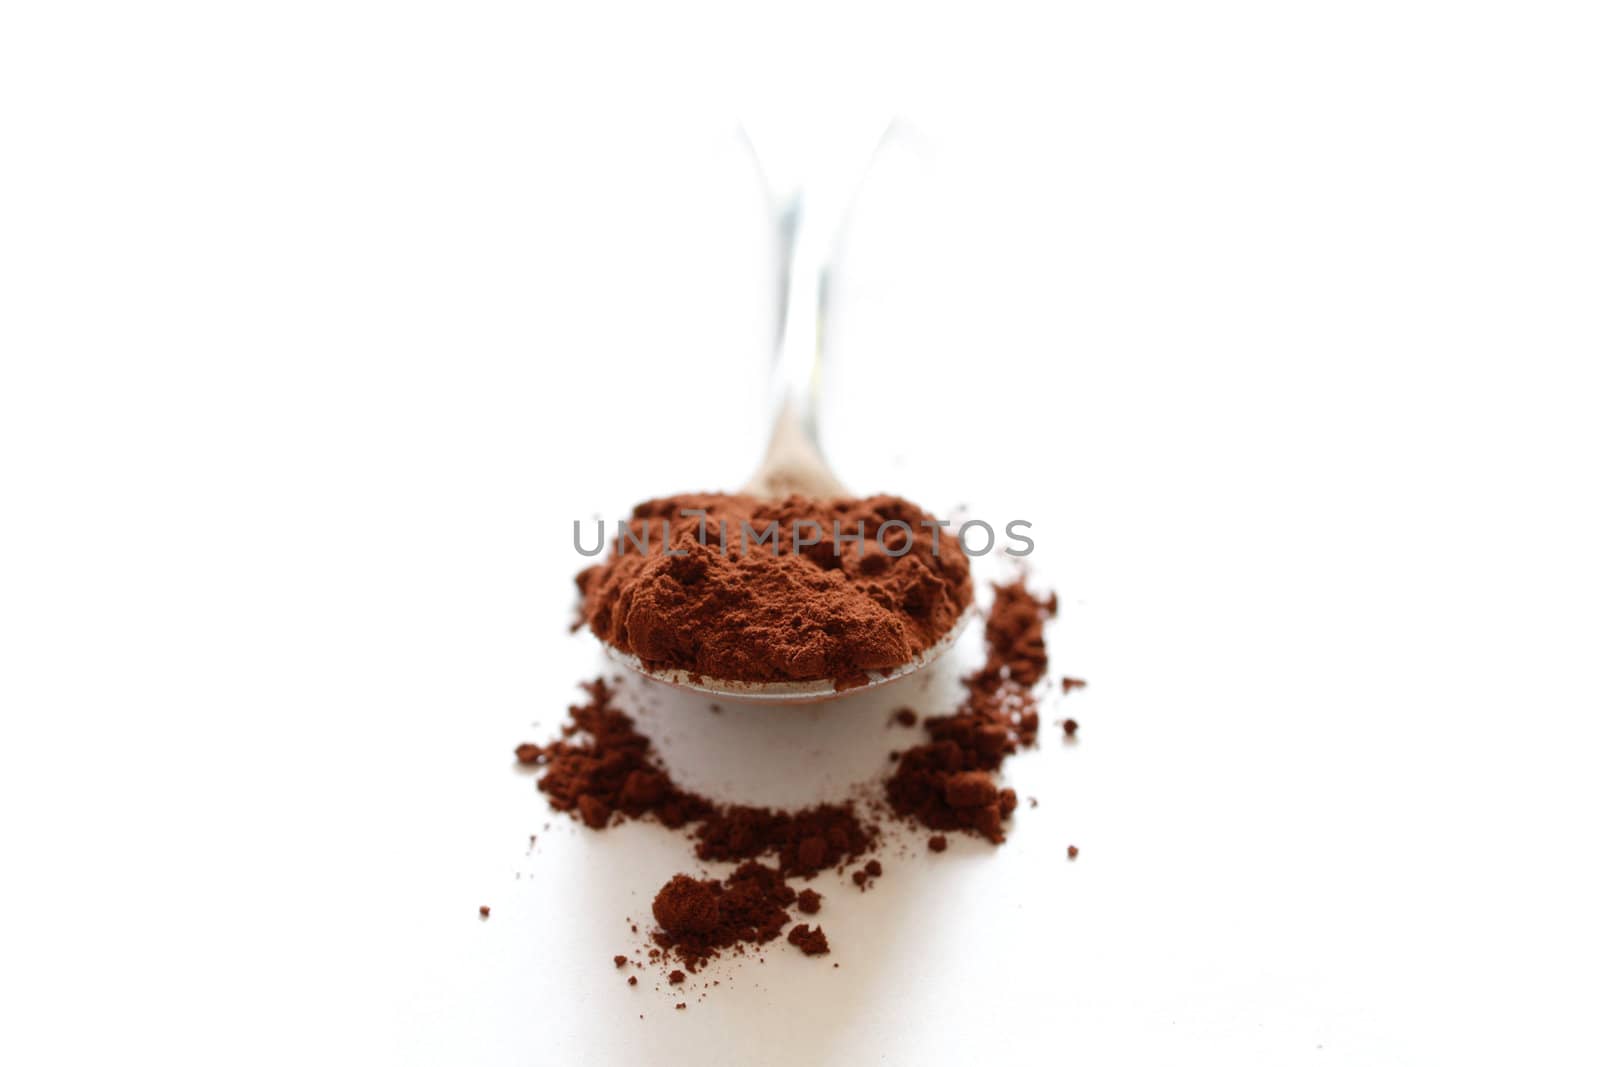 Cocoa powder by leeser